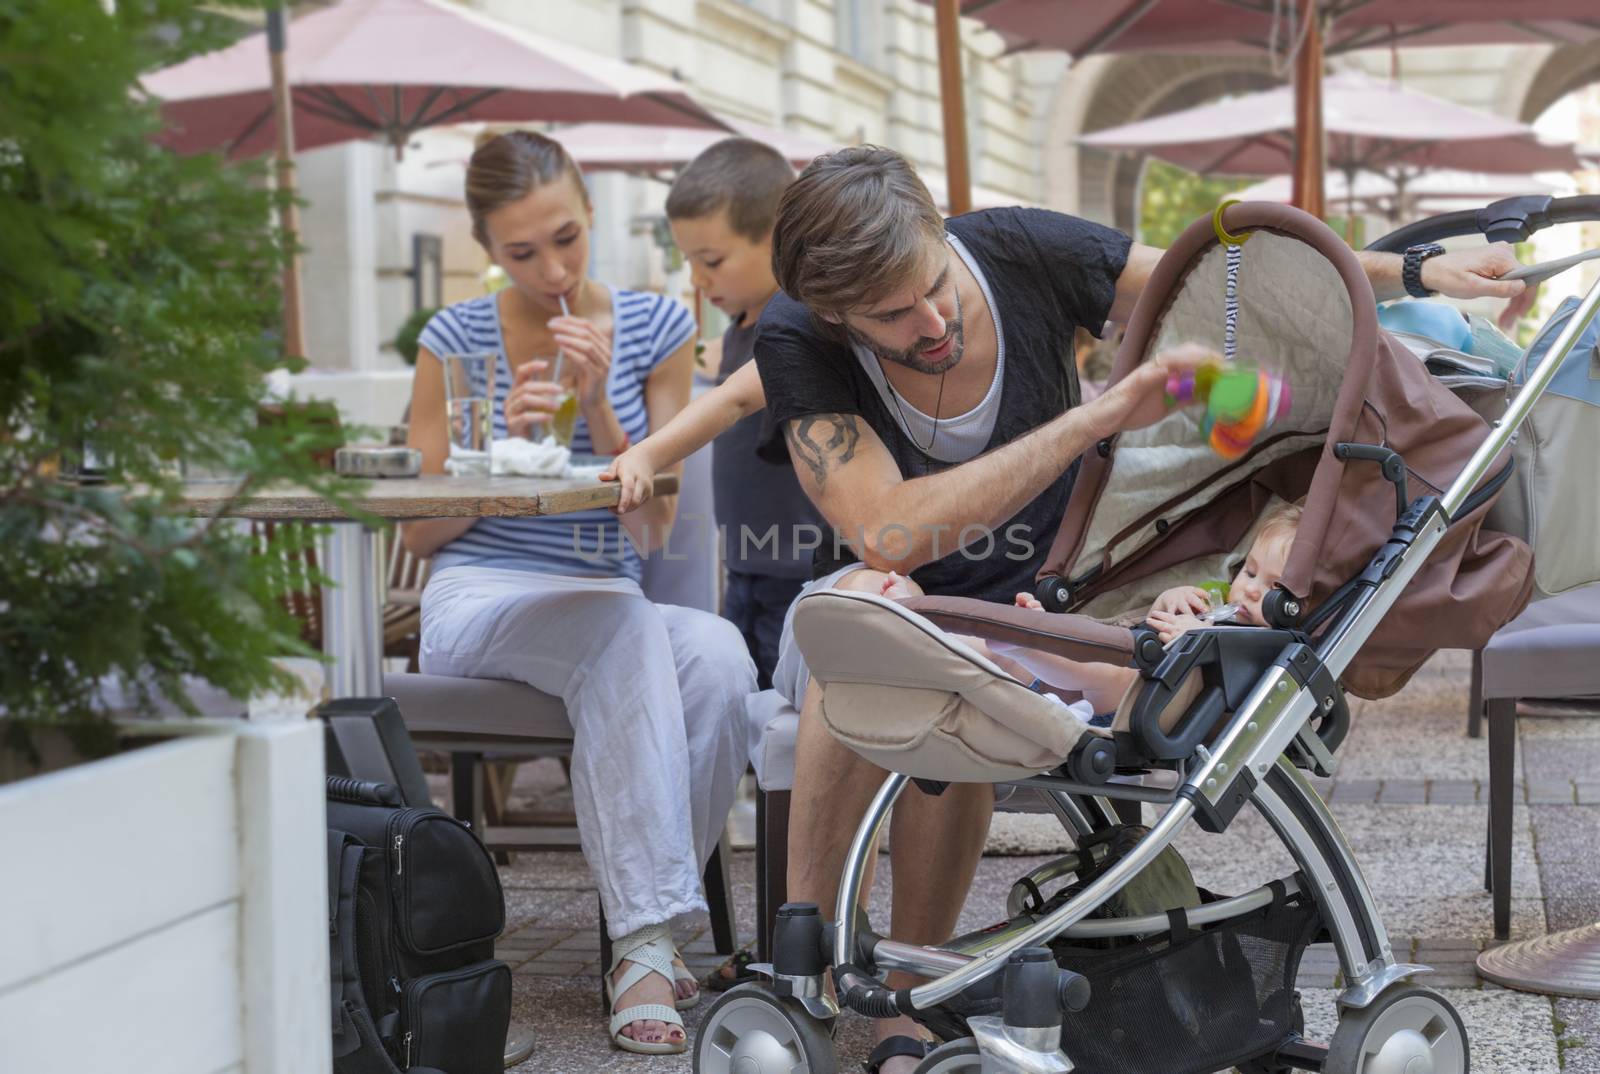 A father is taking care of his baby, while her life and other young boy are communicating in background. Cafe outdoors, summer.